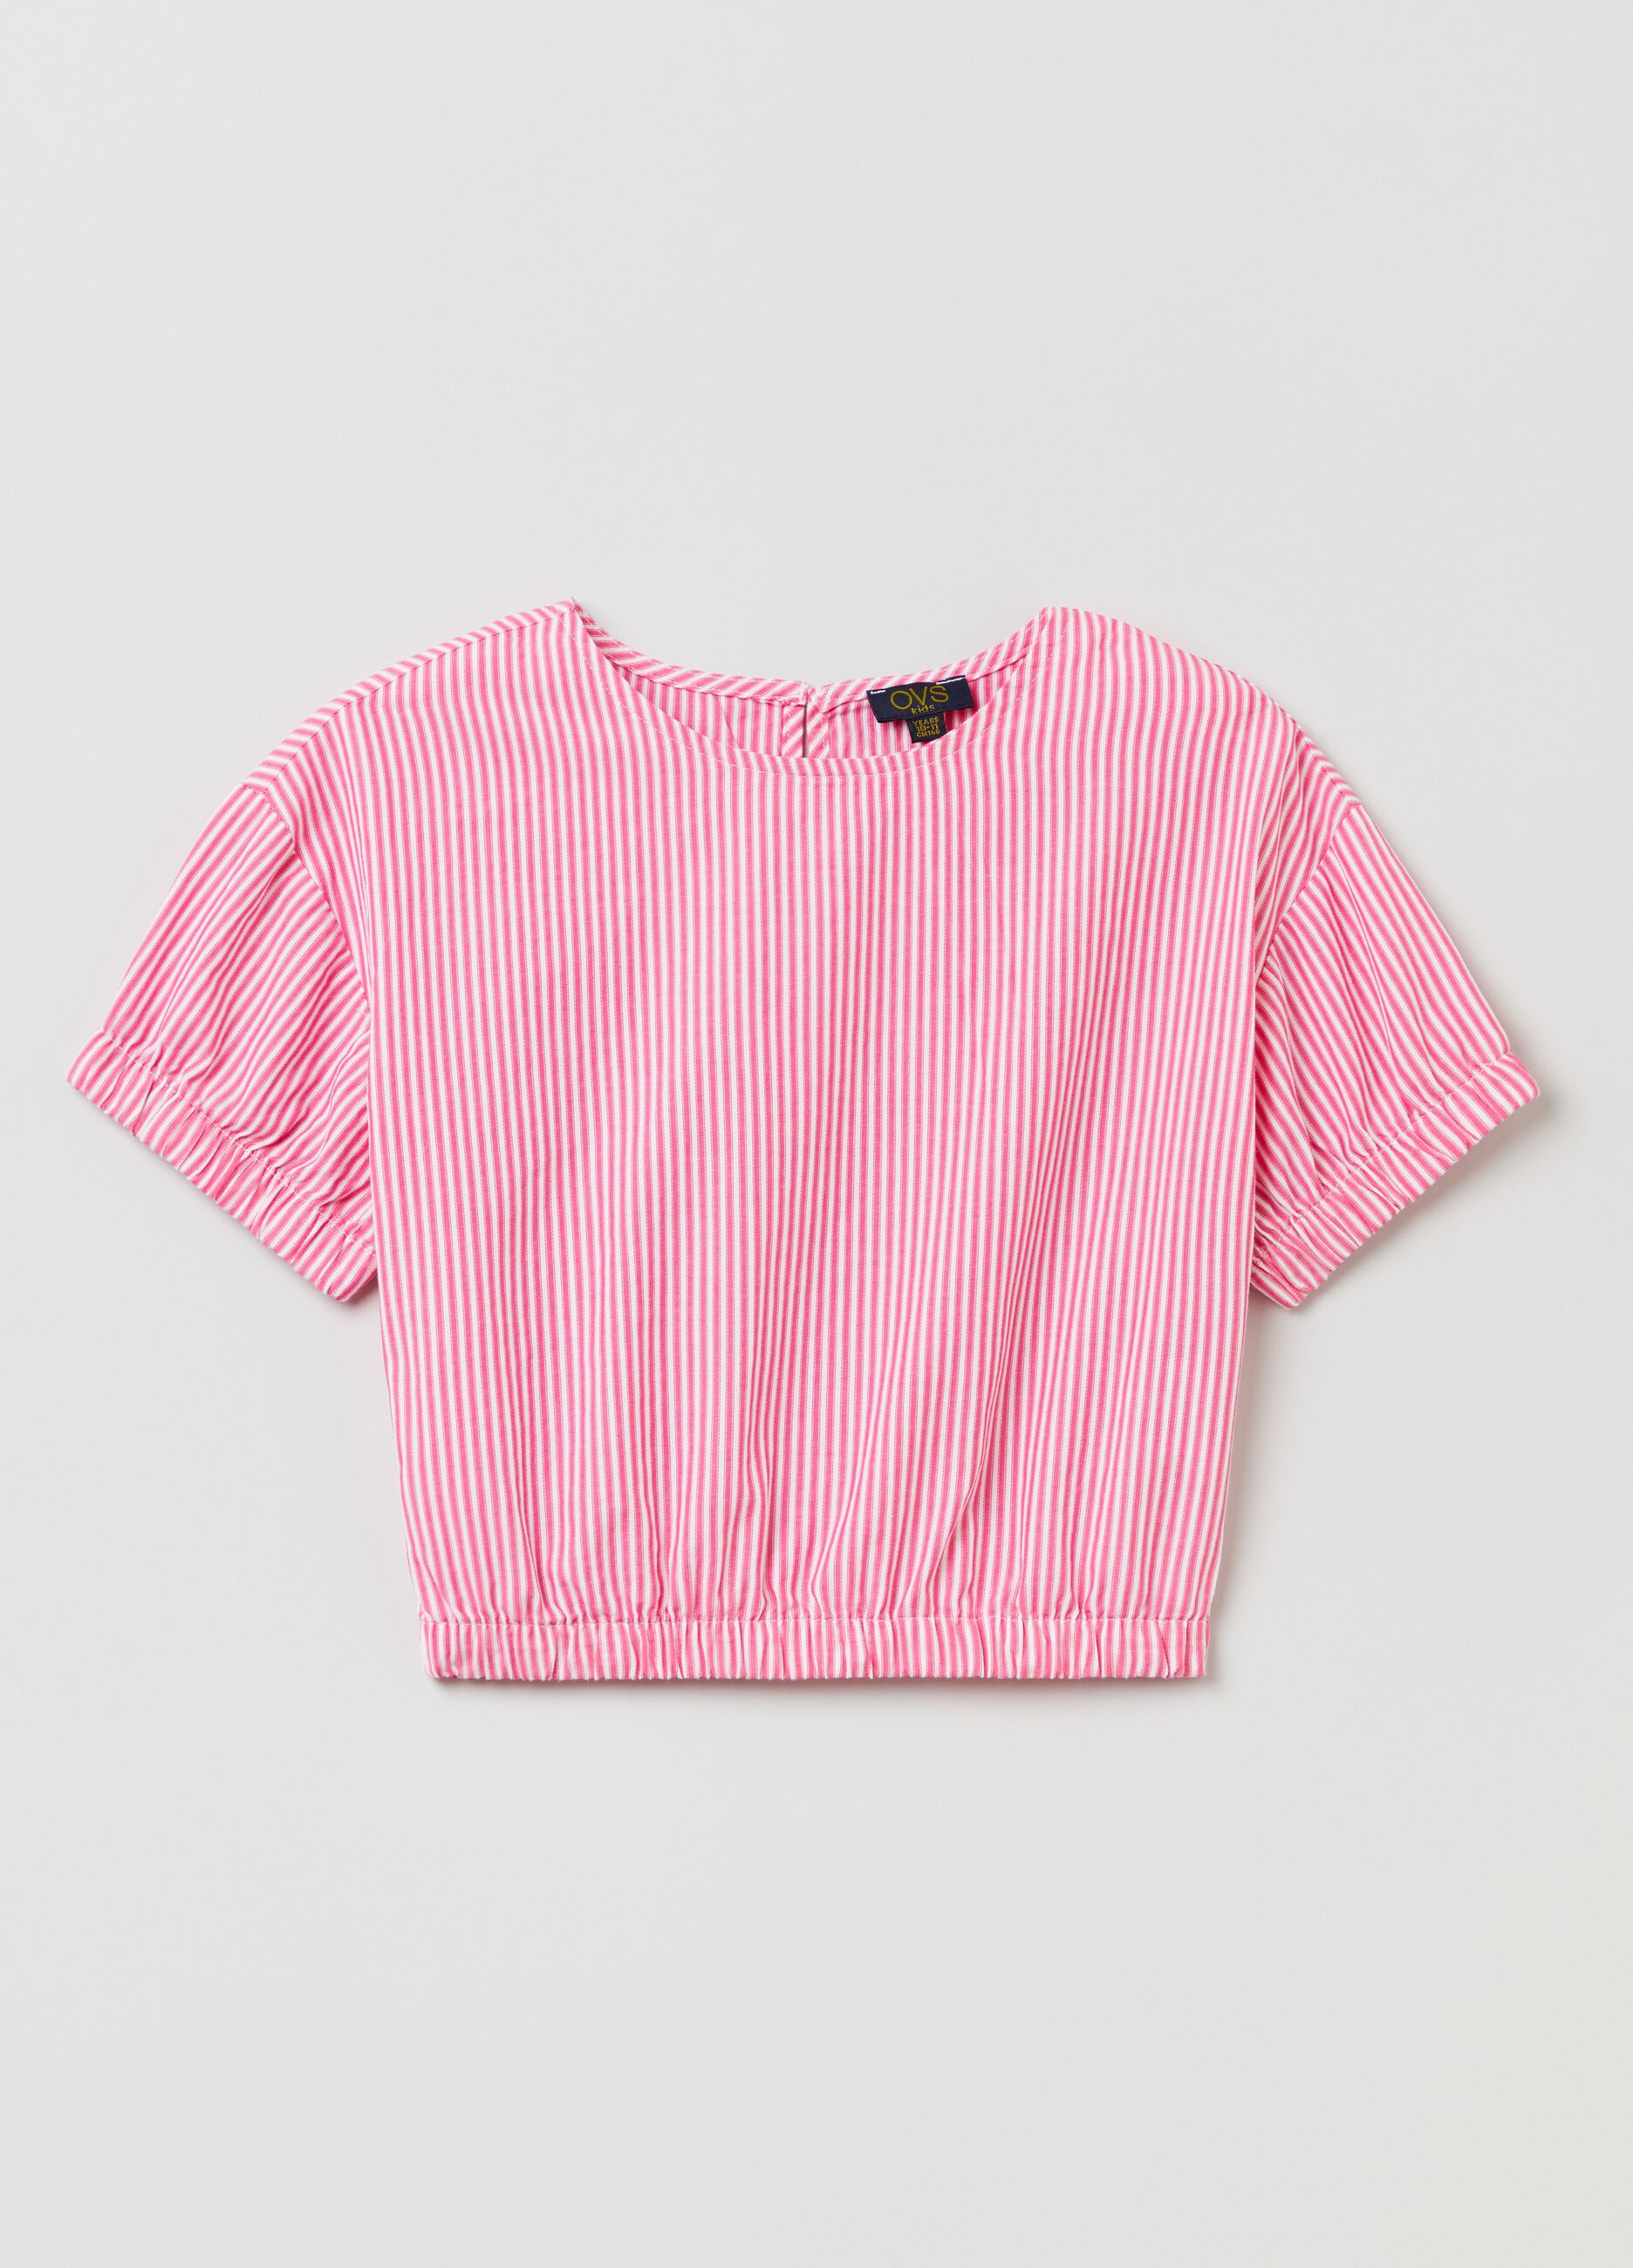 Crop blouse with striped pattern